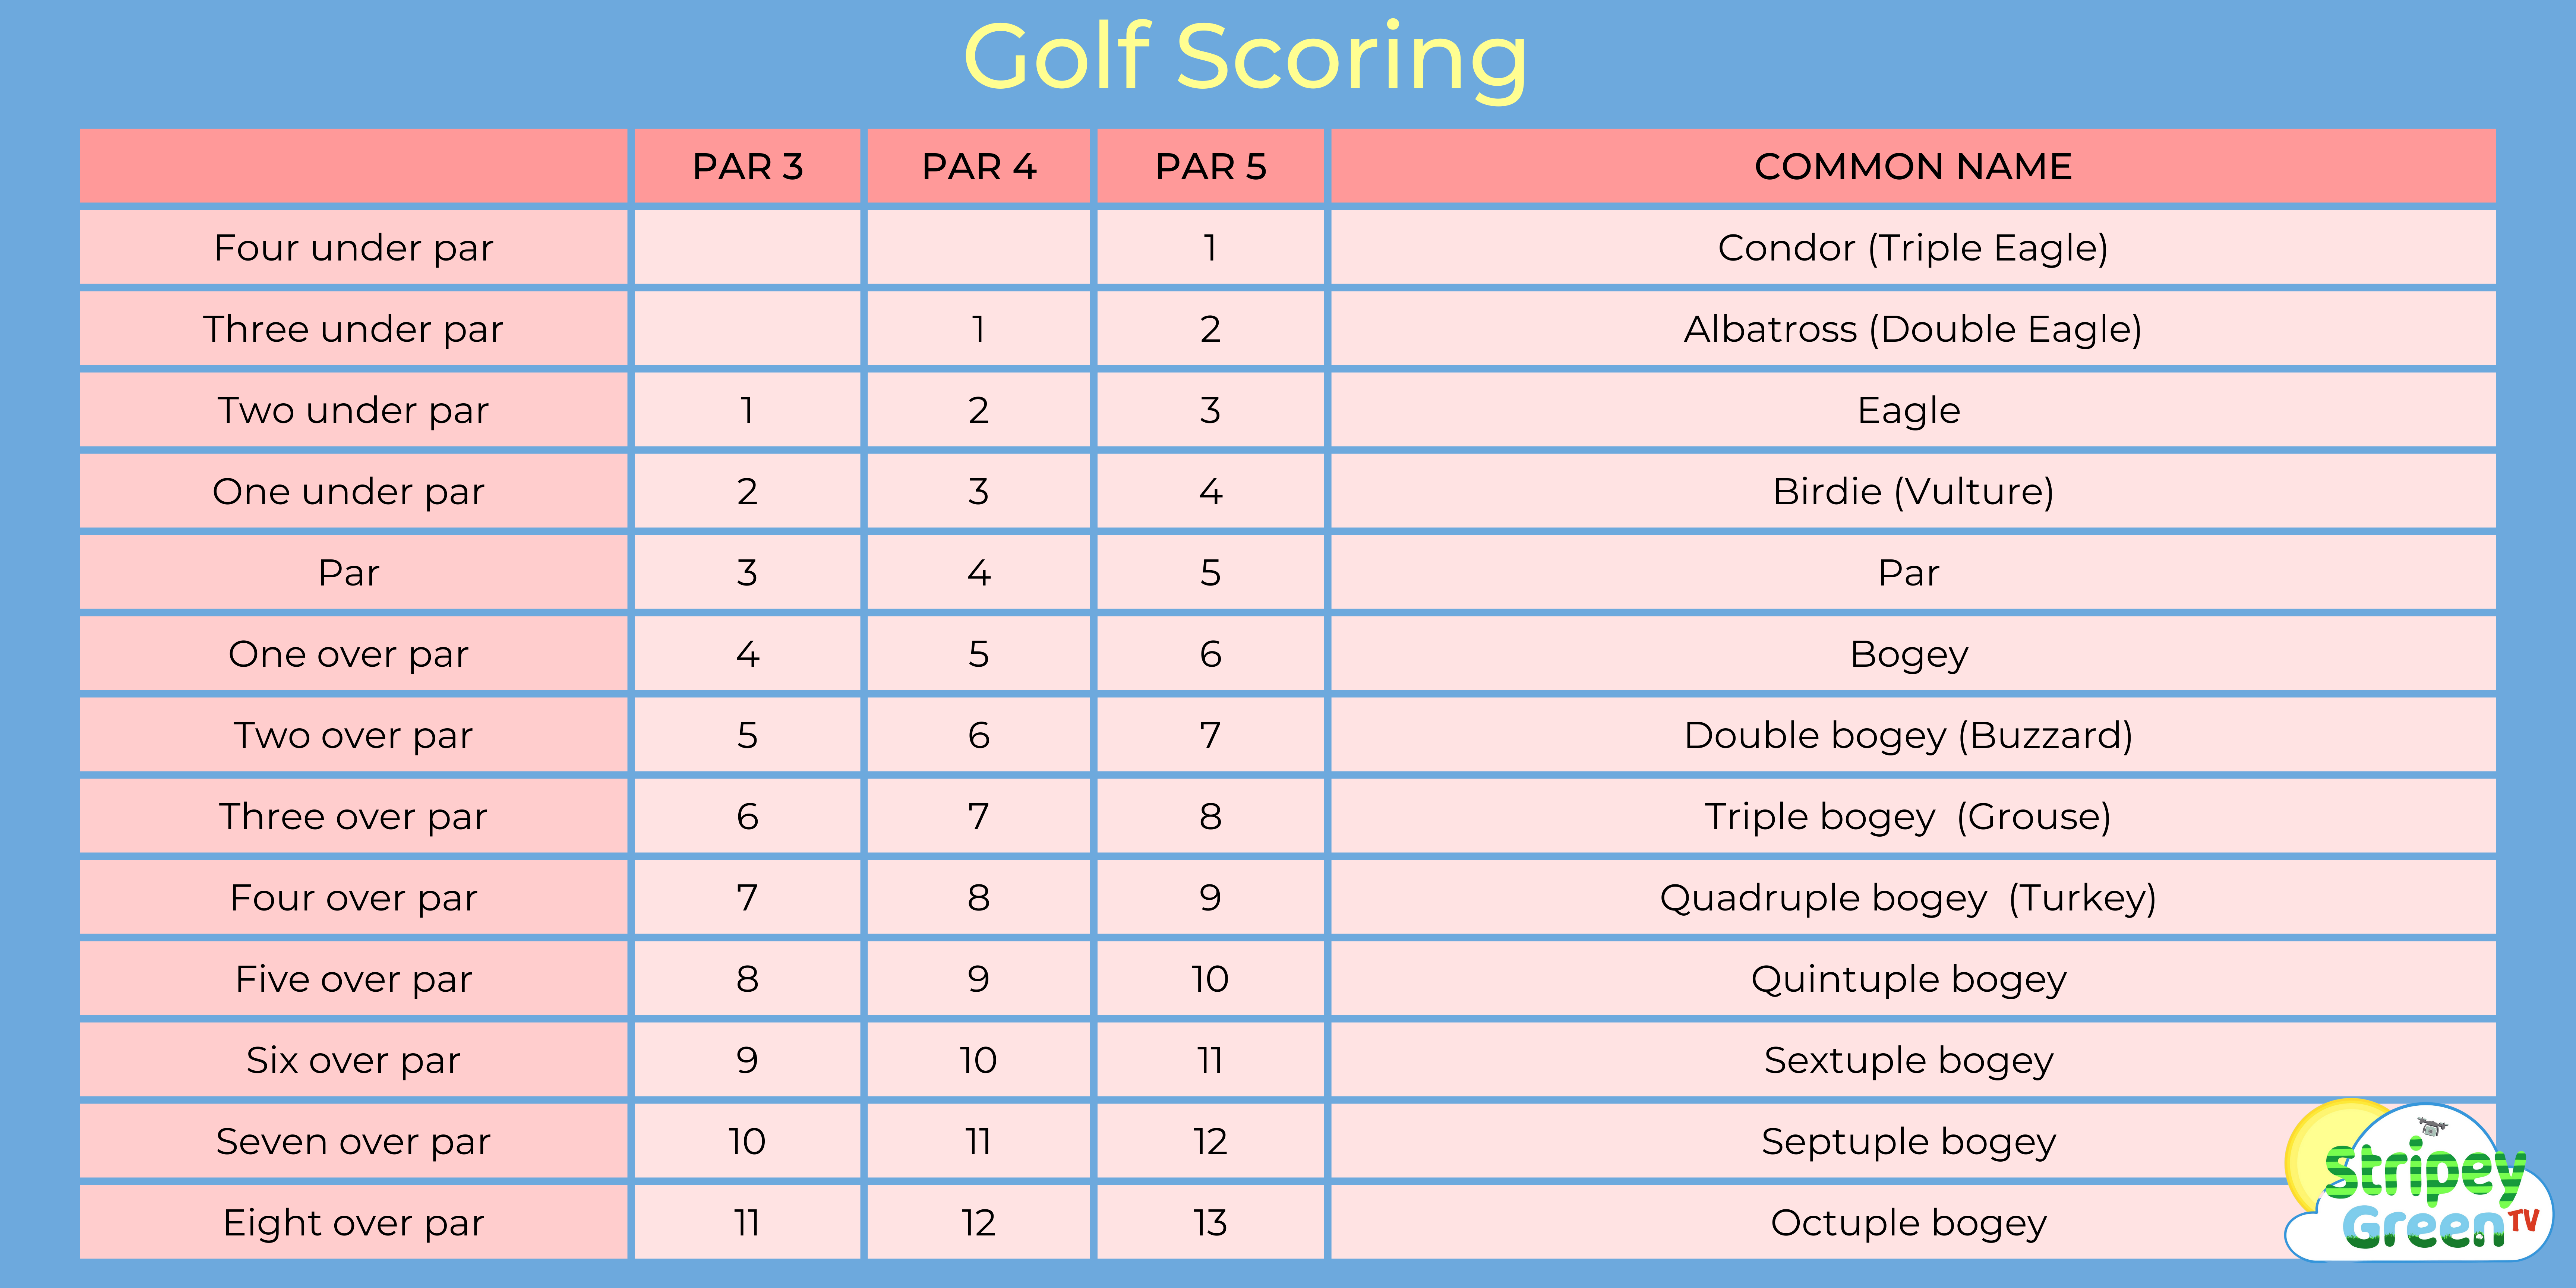 Golf Scoring, what is a Golf Par, what are other scores and how do they relate to Par?